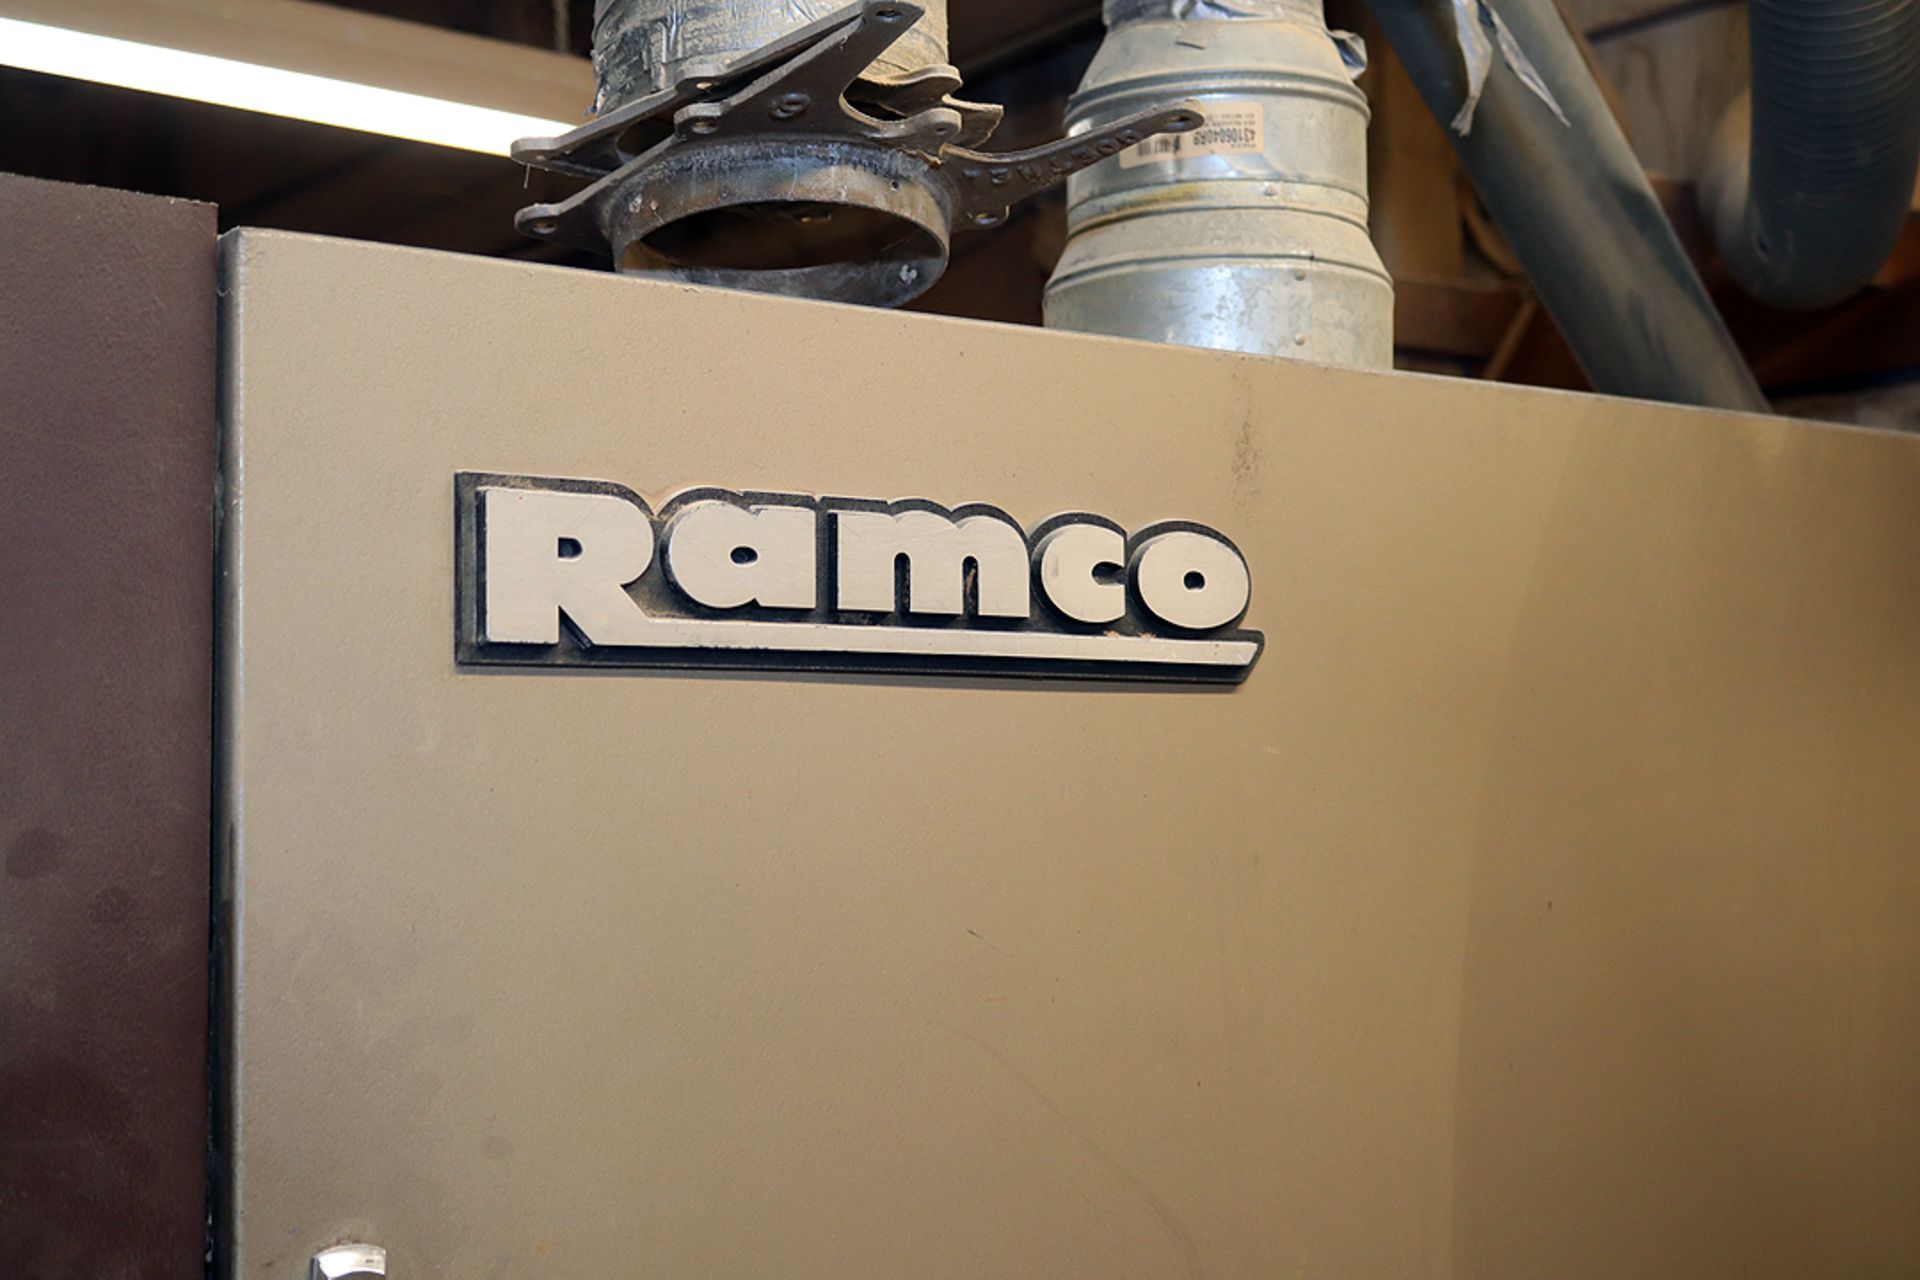 Ramco wide belt sander, model 37T 60, electronic eye is not working and 1 roller needs to be - Image 3 of 9